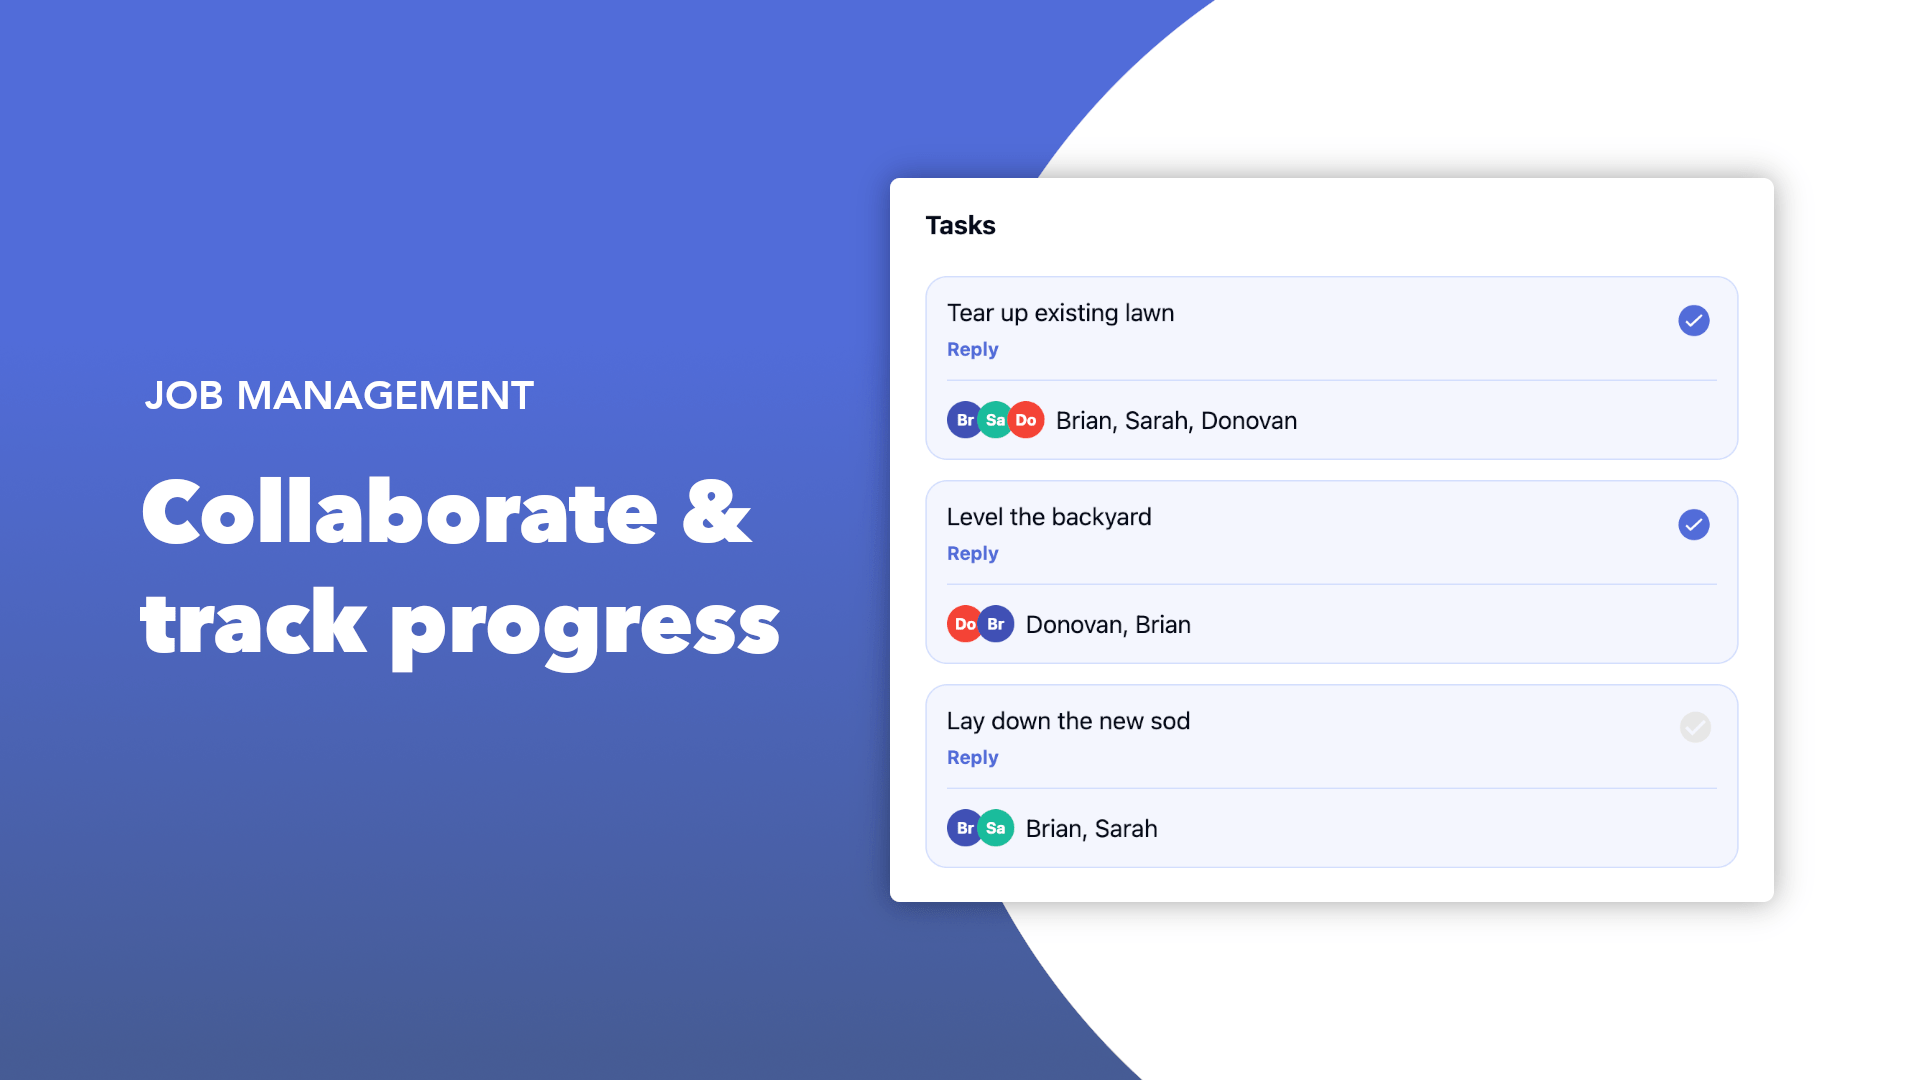 Streamline project and task management. Assign, monitor, and collaborate on tasks effortlessly, ensuring projects stay on track and team members are aligned and engaged.